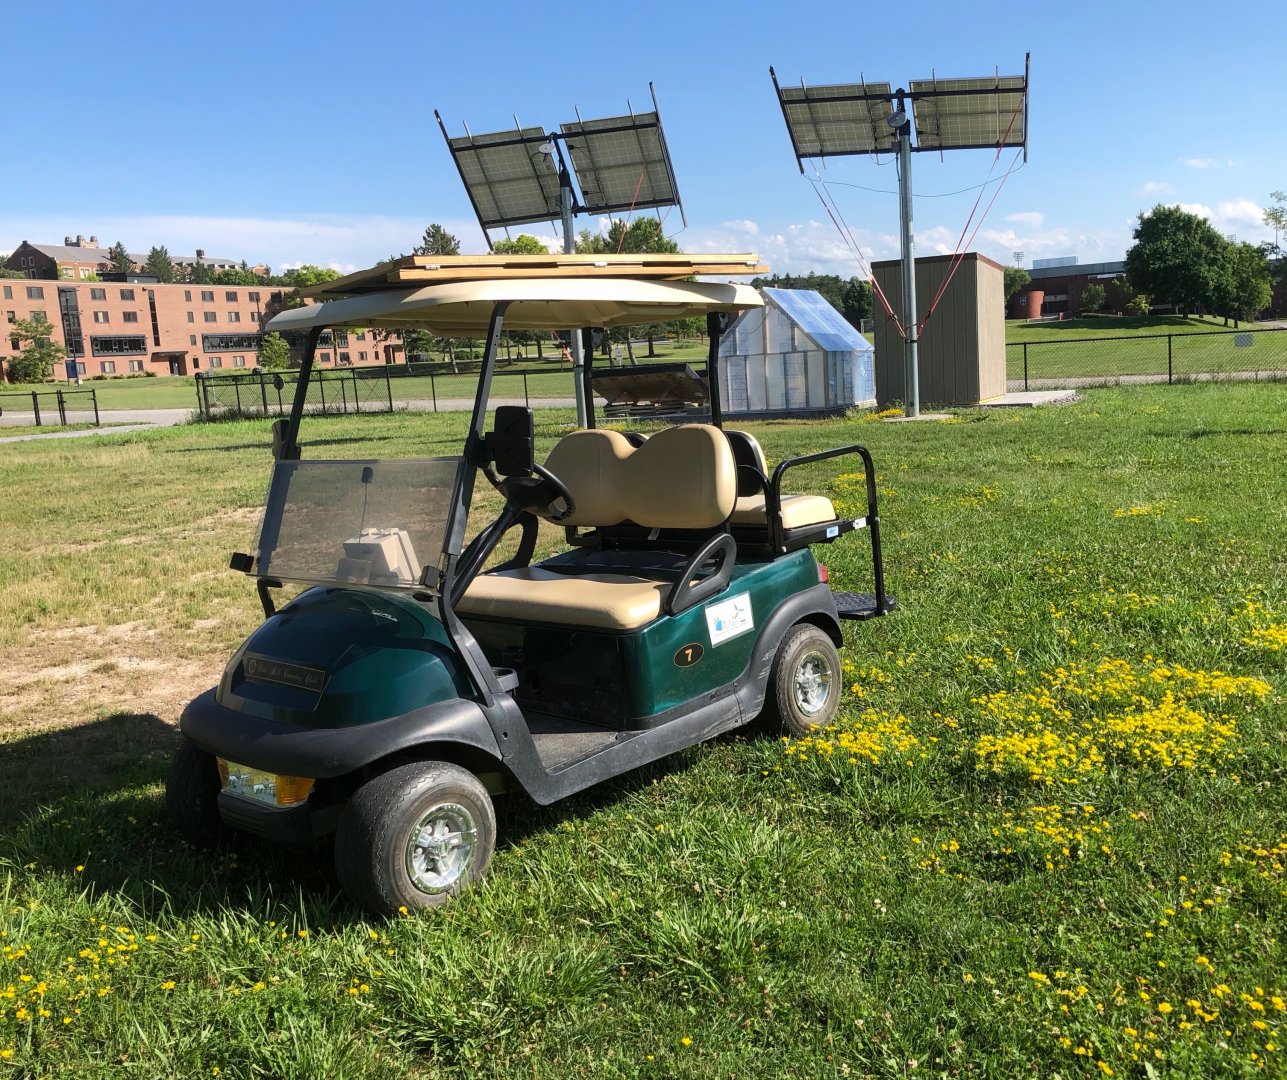 The eCart parked in front of the solar array in the eGarden.